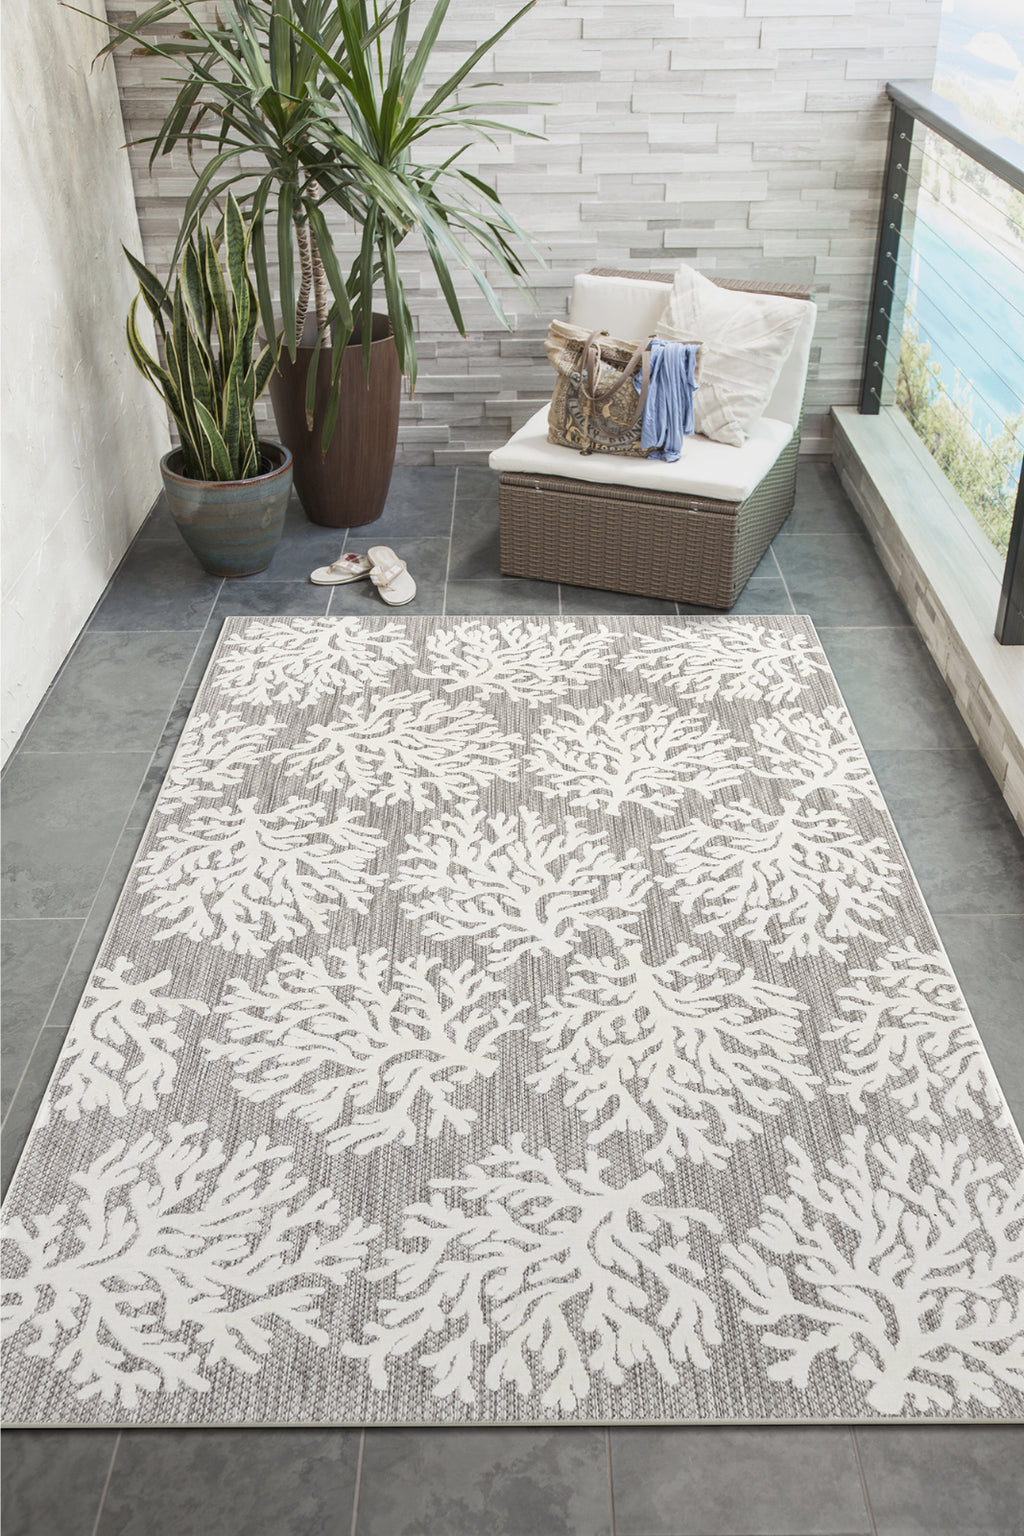 Trans Ocean Rialto 7041/12 Coral Ivory Area Rug by Liora Manne Room Scene Image Feature